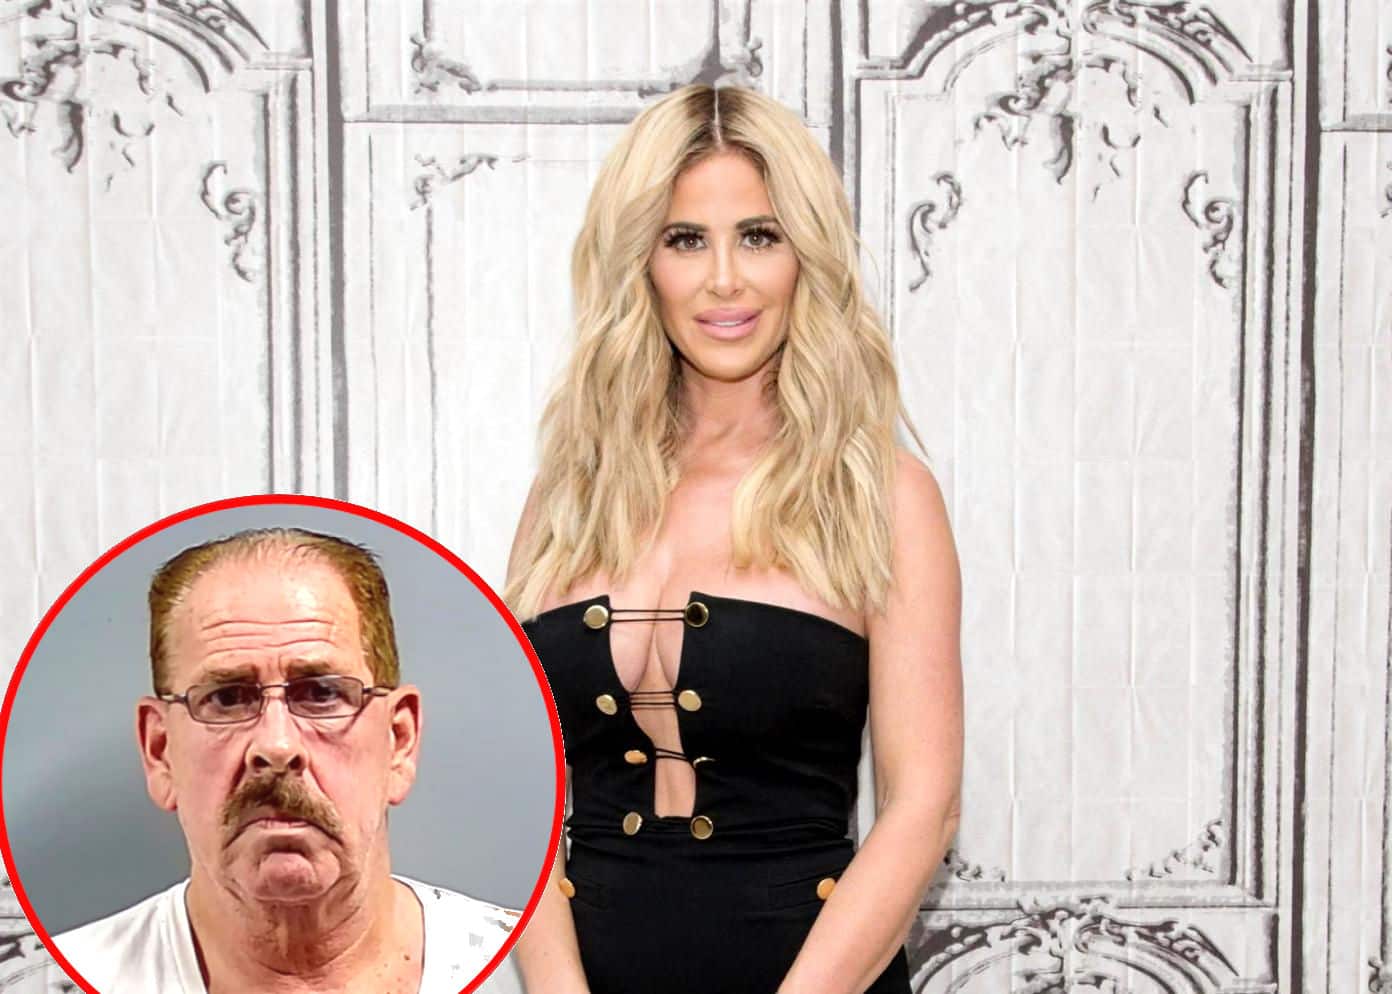 RHOA Alum Kim Zolciak's Estranged Father Arrested for Battery After Allegedly Pushing His "Highly Intoxicated" Wife, Leading to a Head Injury